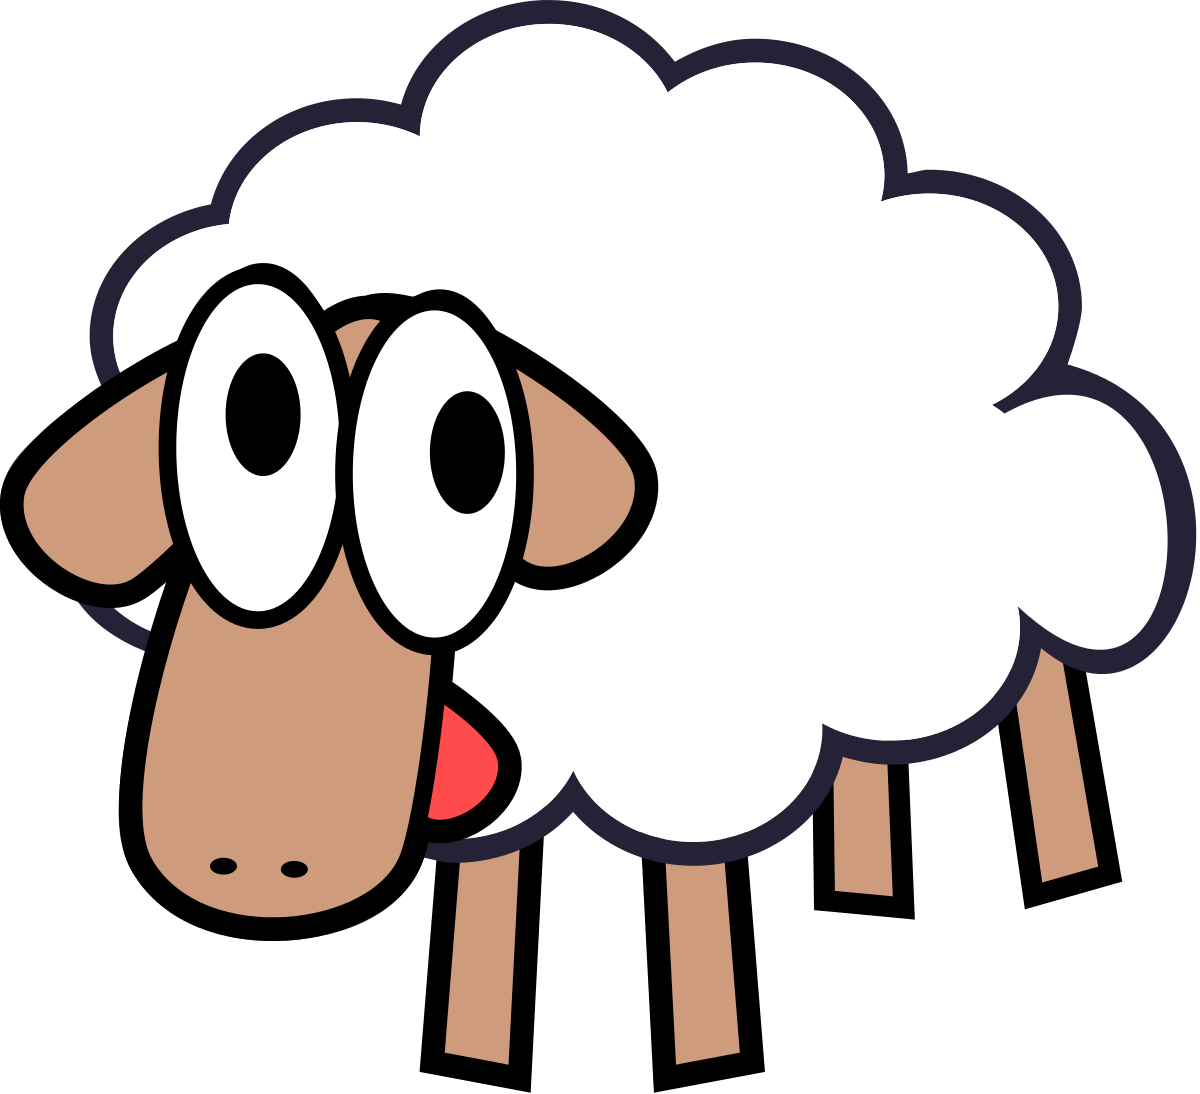 Free Simple Sheep Cliparts, Download Free Clip Art, Free